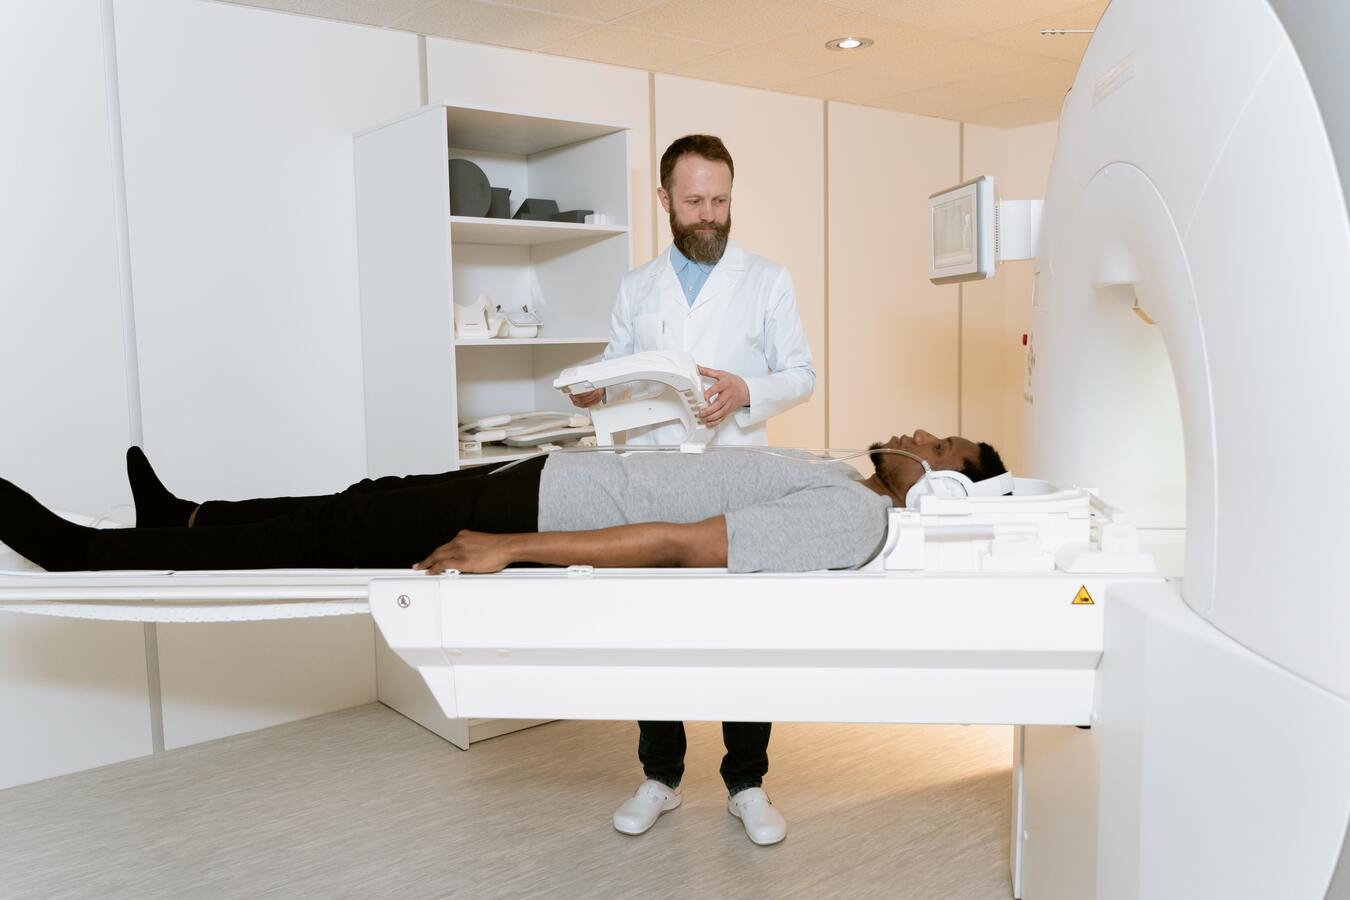 Radiologist technician and their patient going into an MRI machine